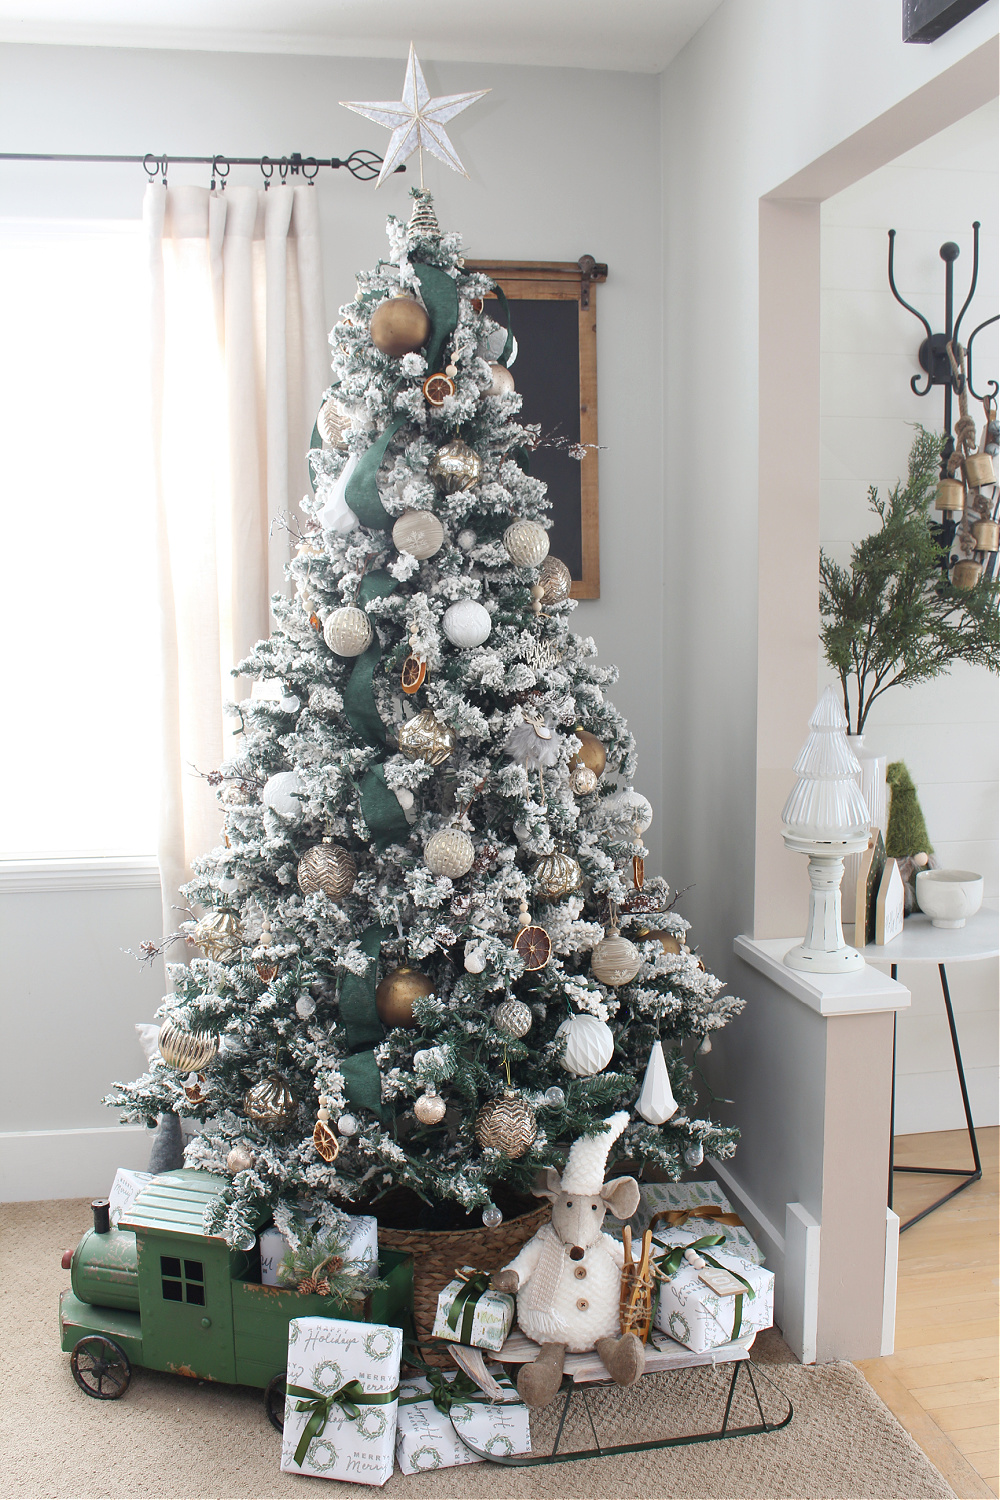 Christmas tree decorated with green ribbon and metallic ornaments.